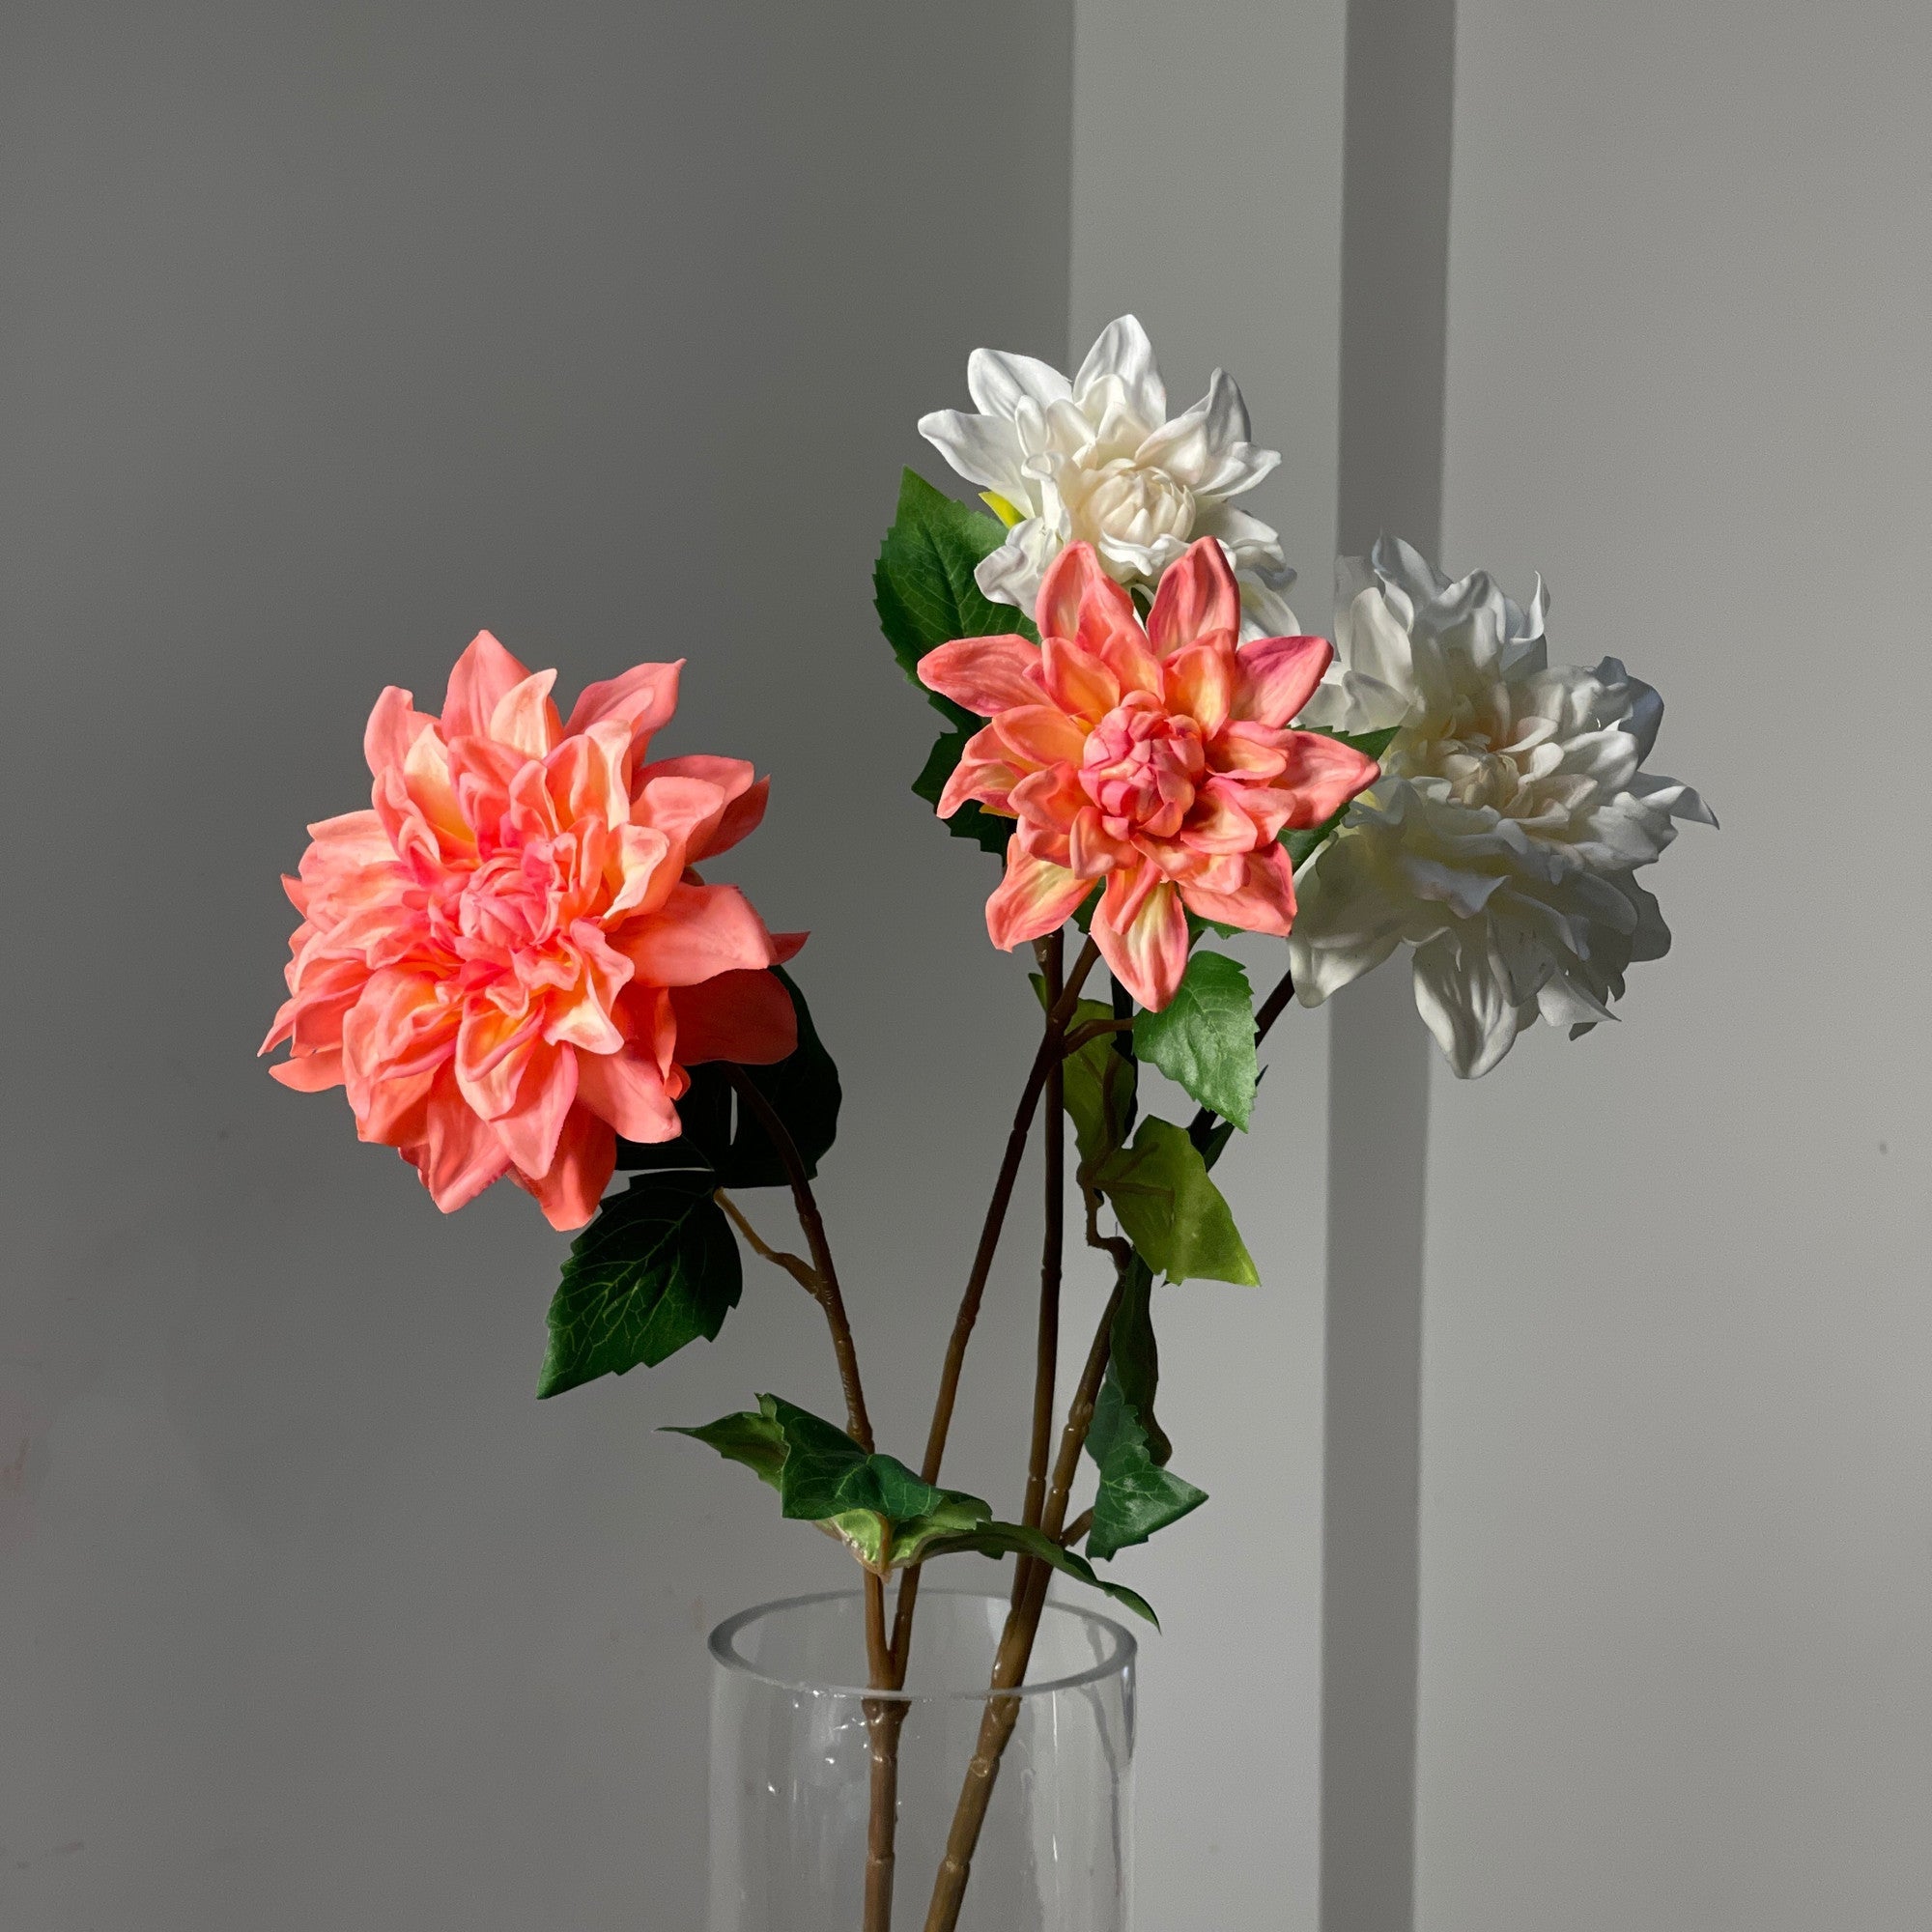 Bulk 23.6" Real Touch Dahlia Stems with 2 Flower Heads Wholesale